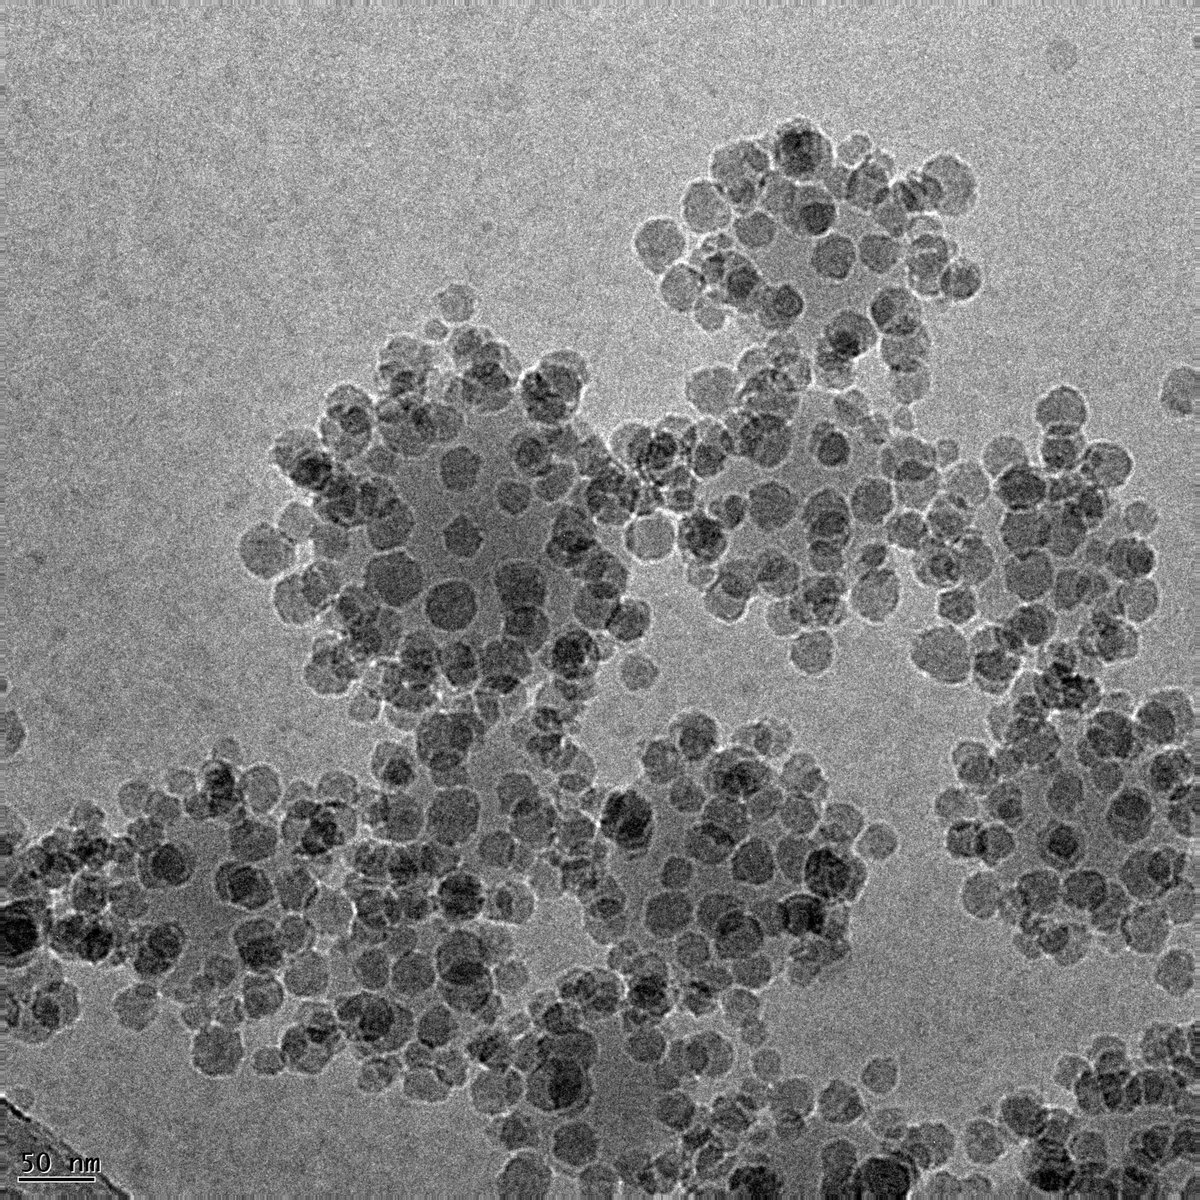 Cryo-TEM image of hybrid supracolloids showing strawberry configuration: how many silica nanoparticles attach to the polymer latex core depending on assembly conditions. Working on advanced water-borne paints, food dispersions, cosmetics? Learn more May 30 bit.ly/431o75x